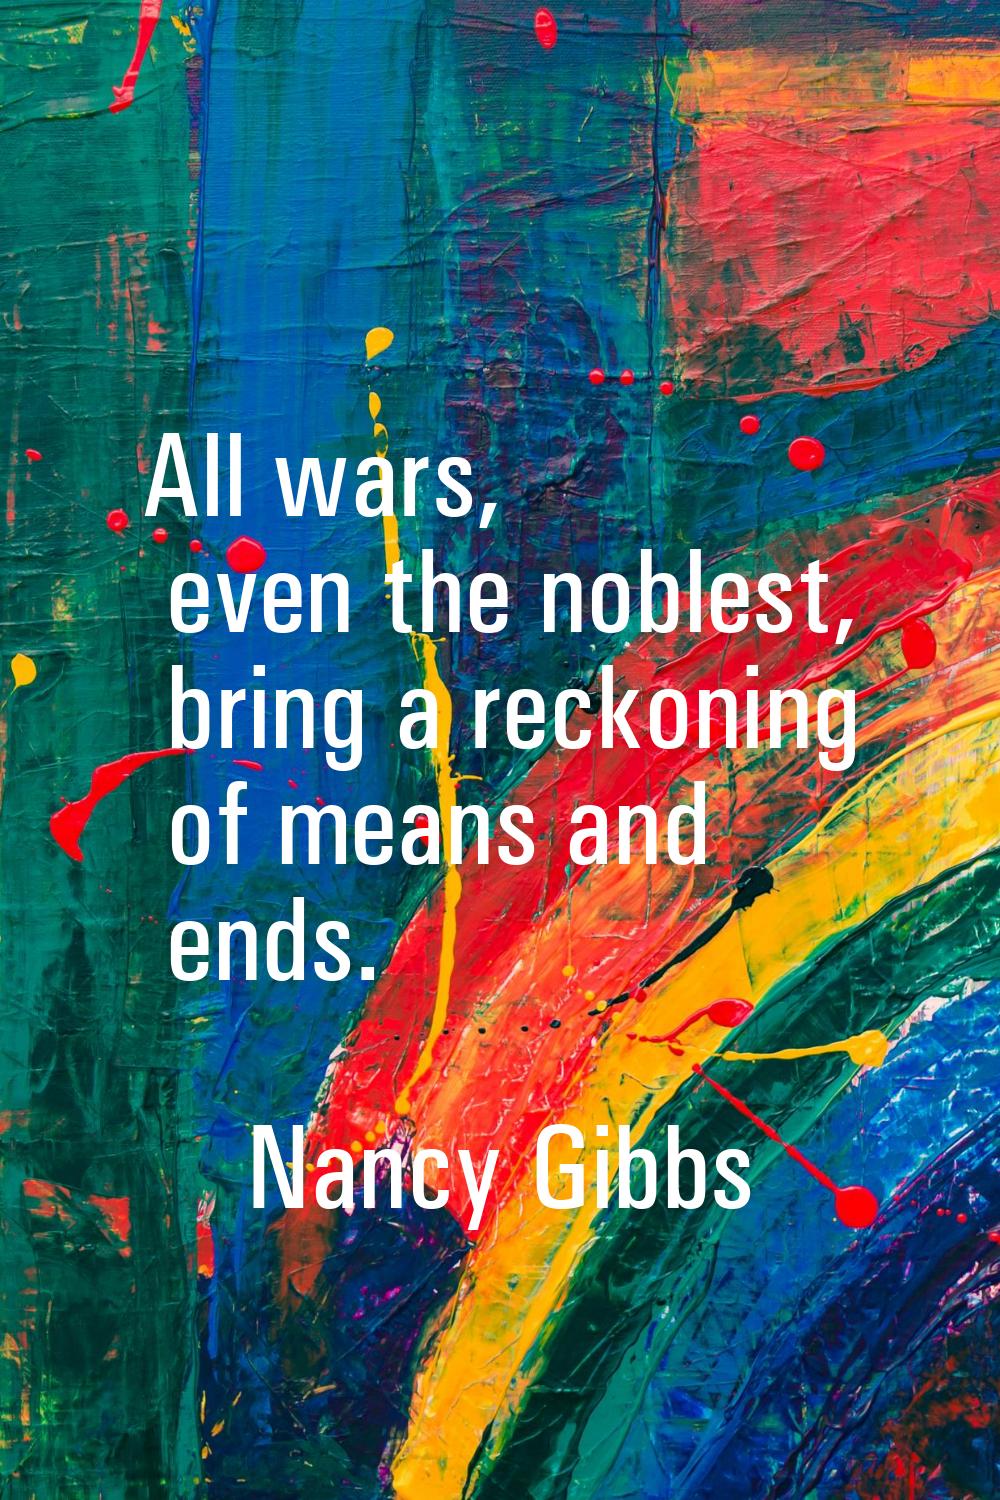 All wars, even the noblest, bring a reckoning of means and ends.